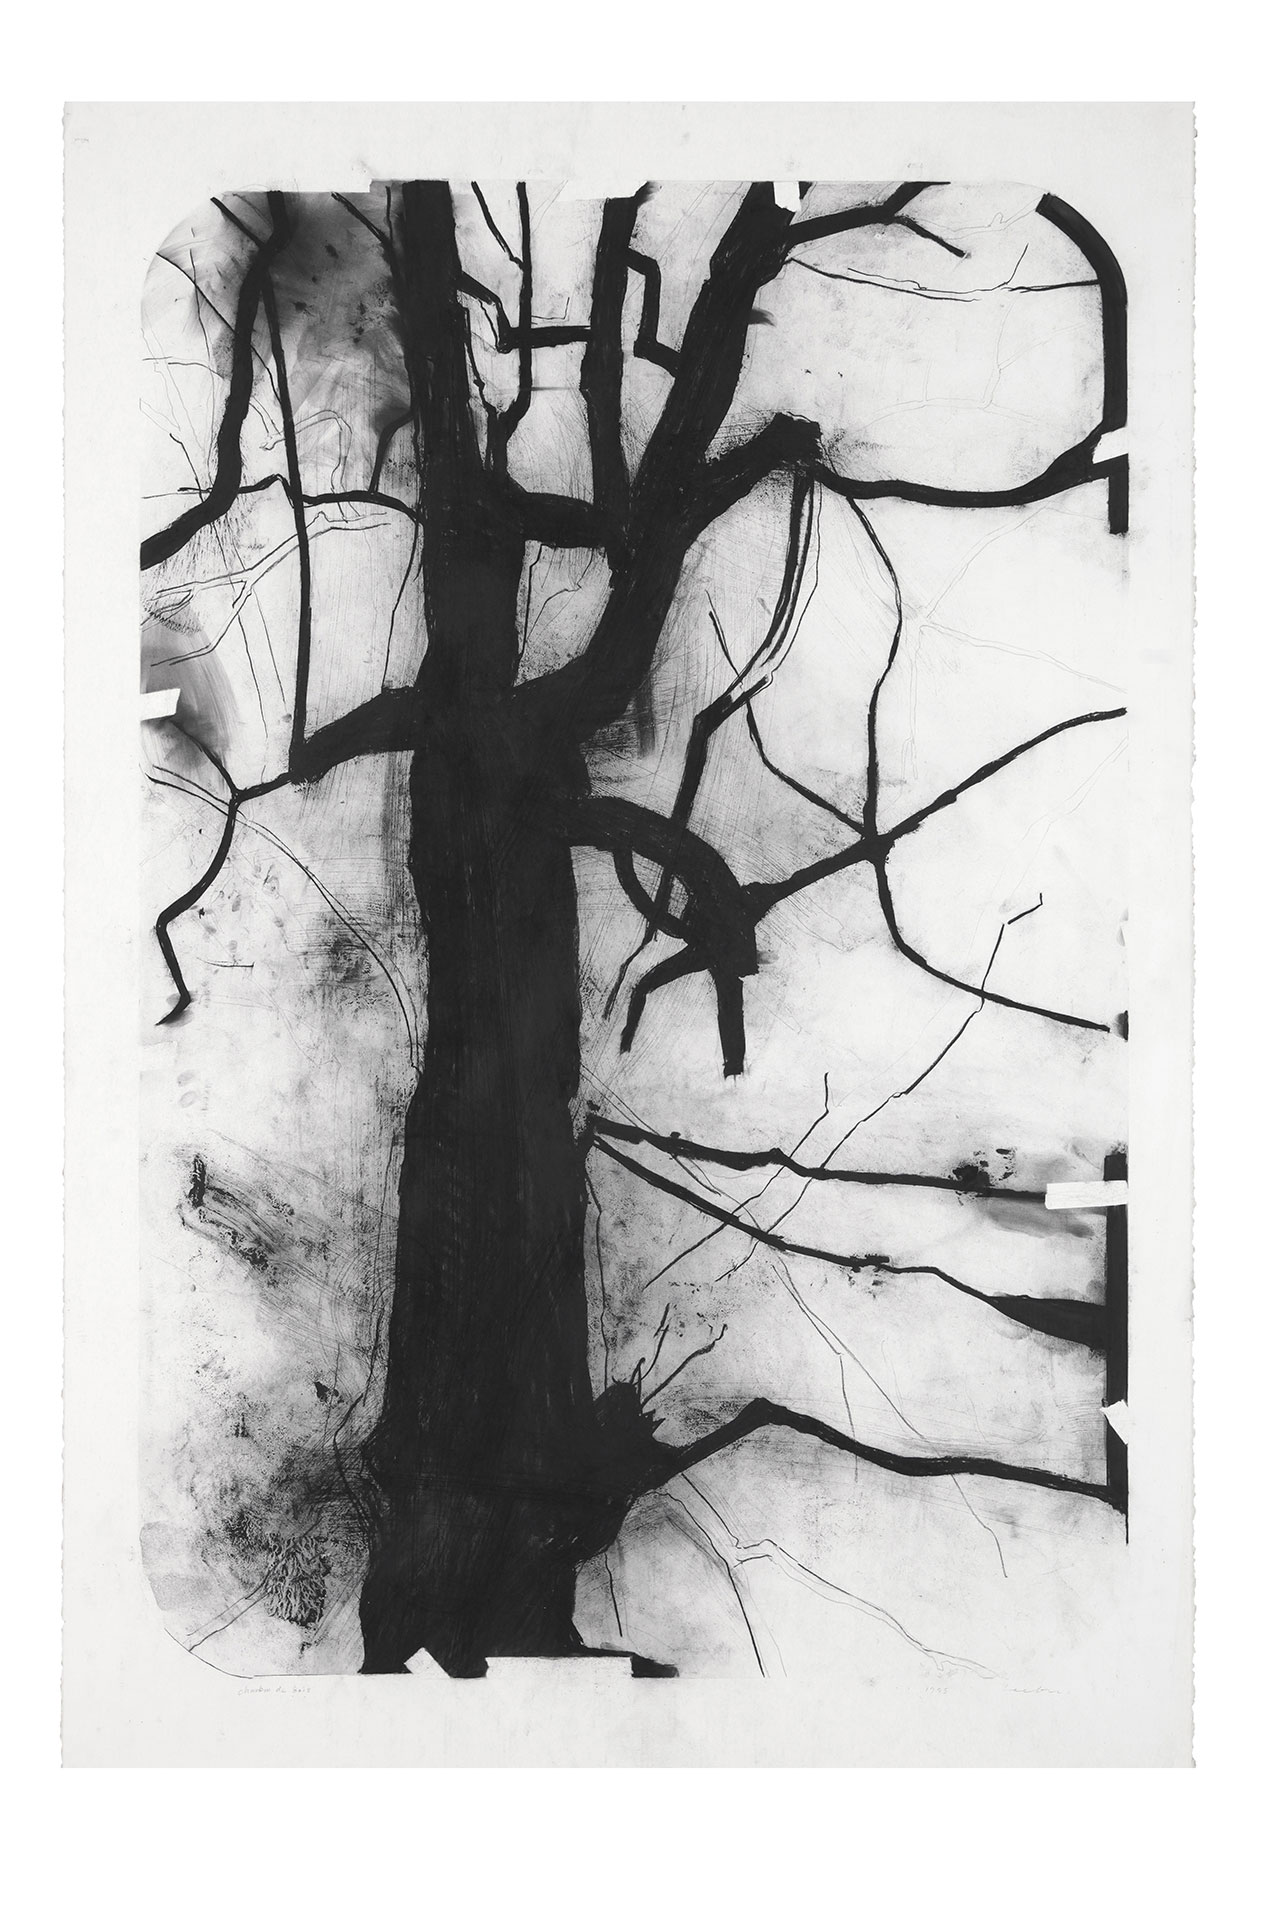 Dessin, 1997. Charcoal on paper, 145 x 114 cm. © Lee Bae.